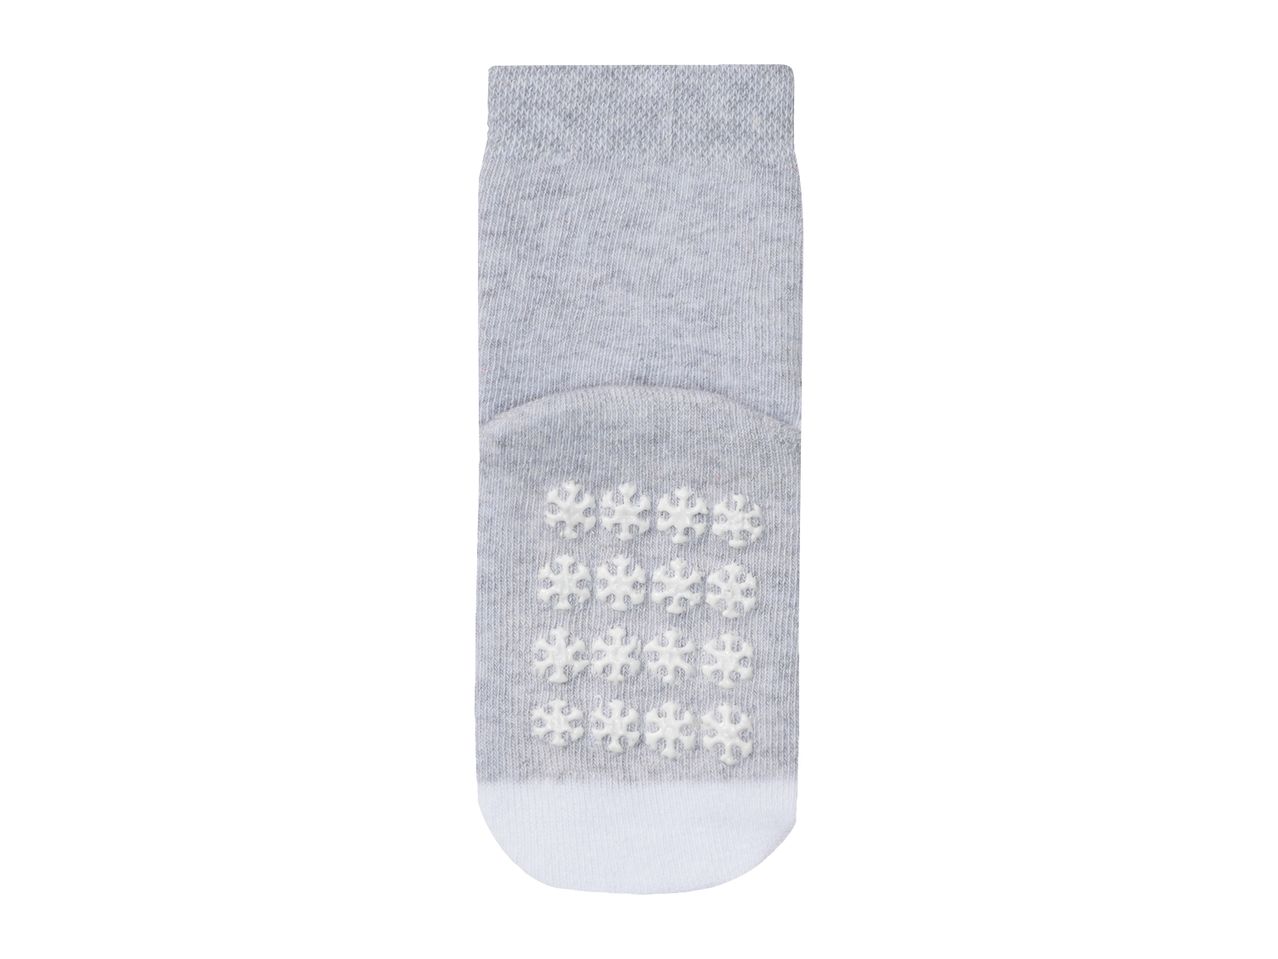 Go to full screen view: Lupilu Younger Kids’ Christmas Thermal Socks - 2 pairs - Image 11